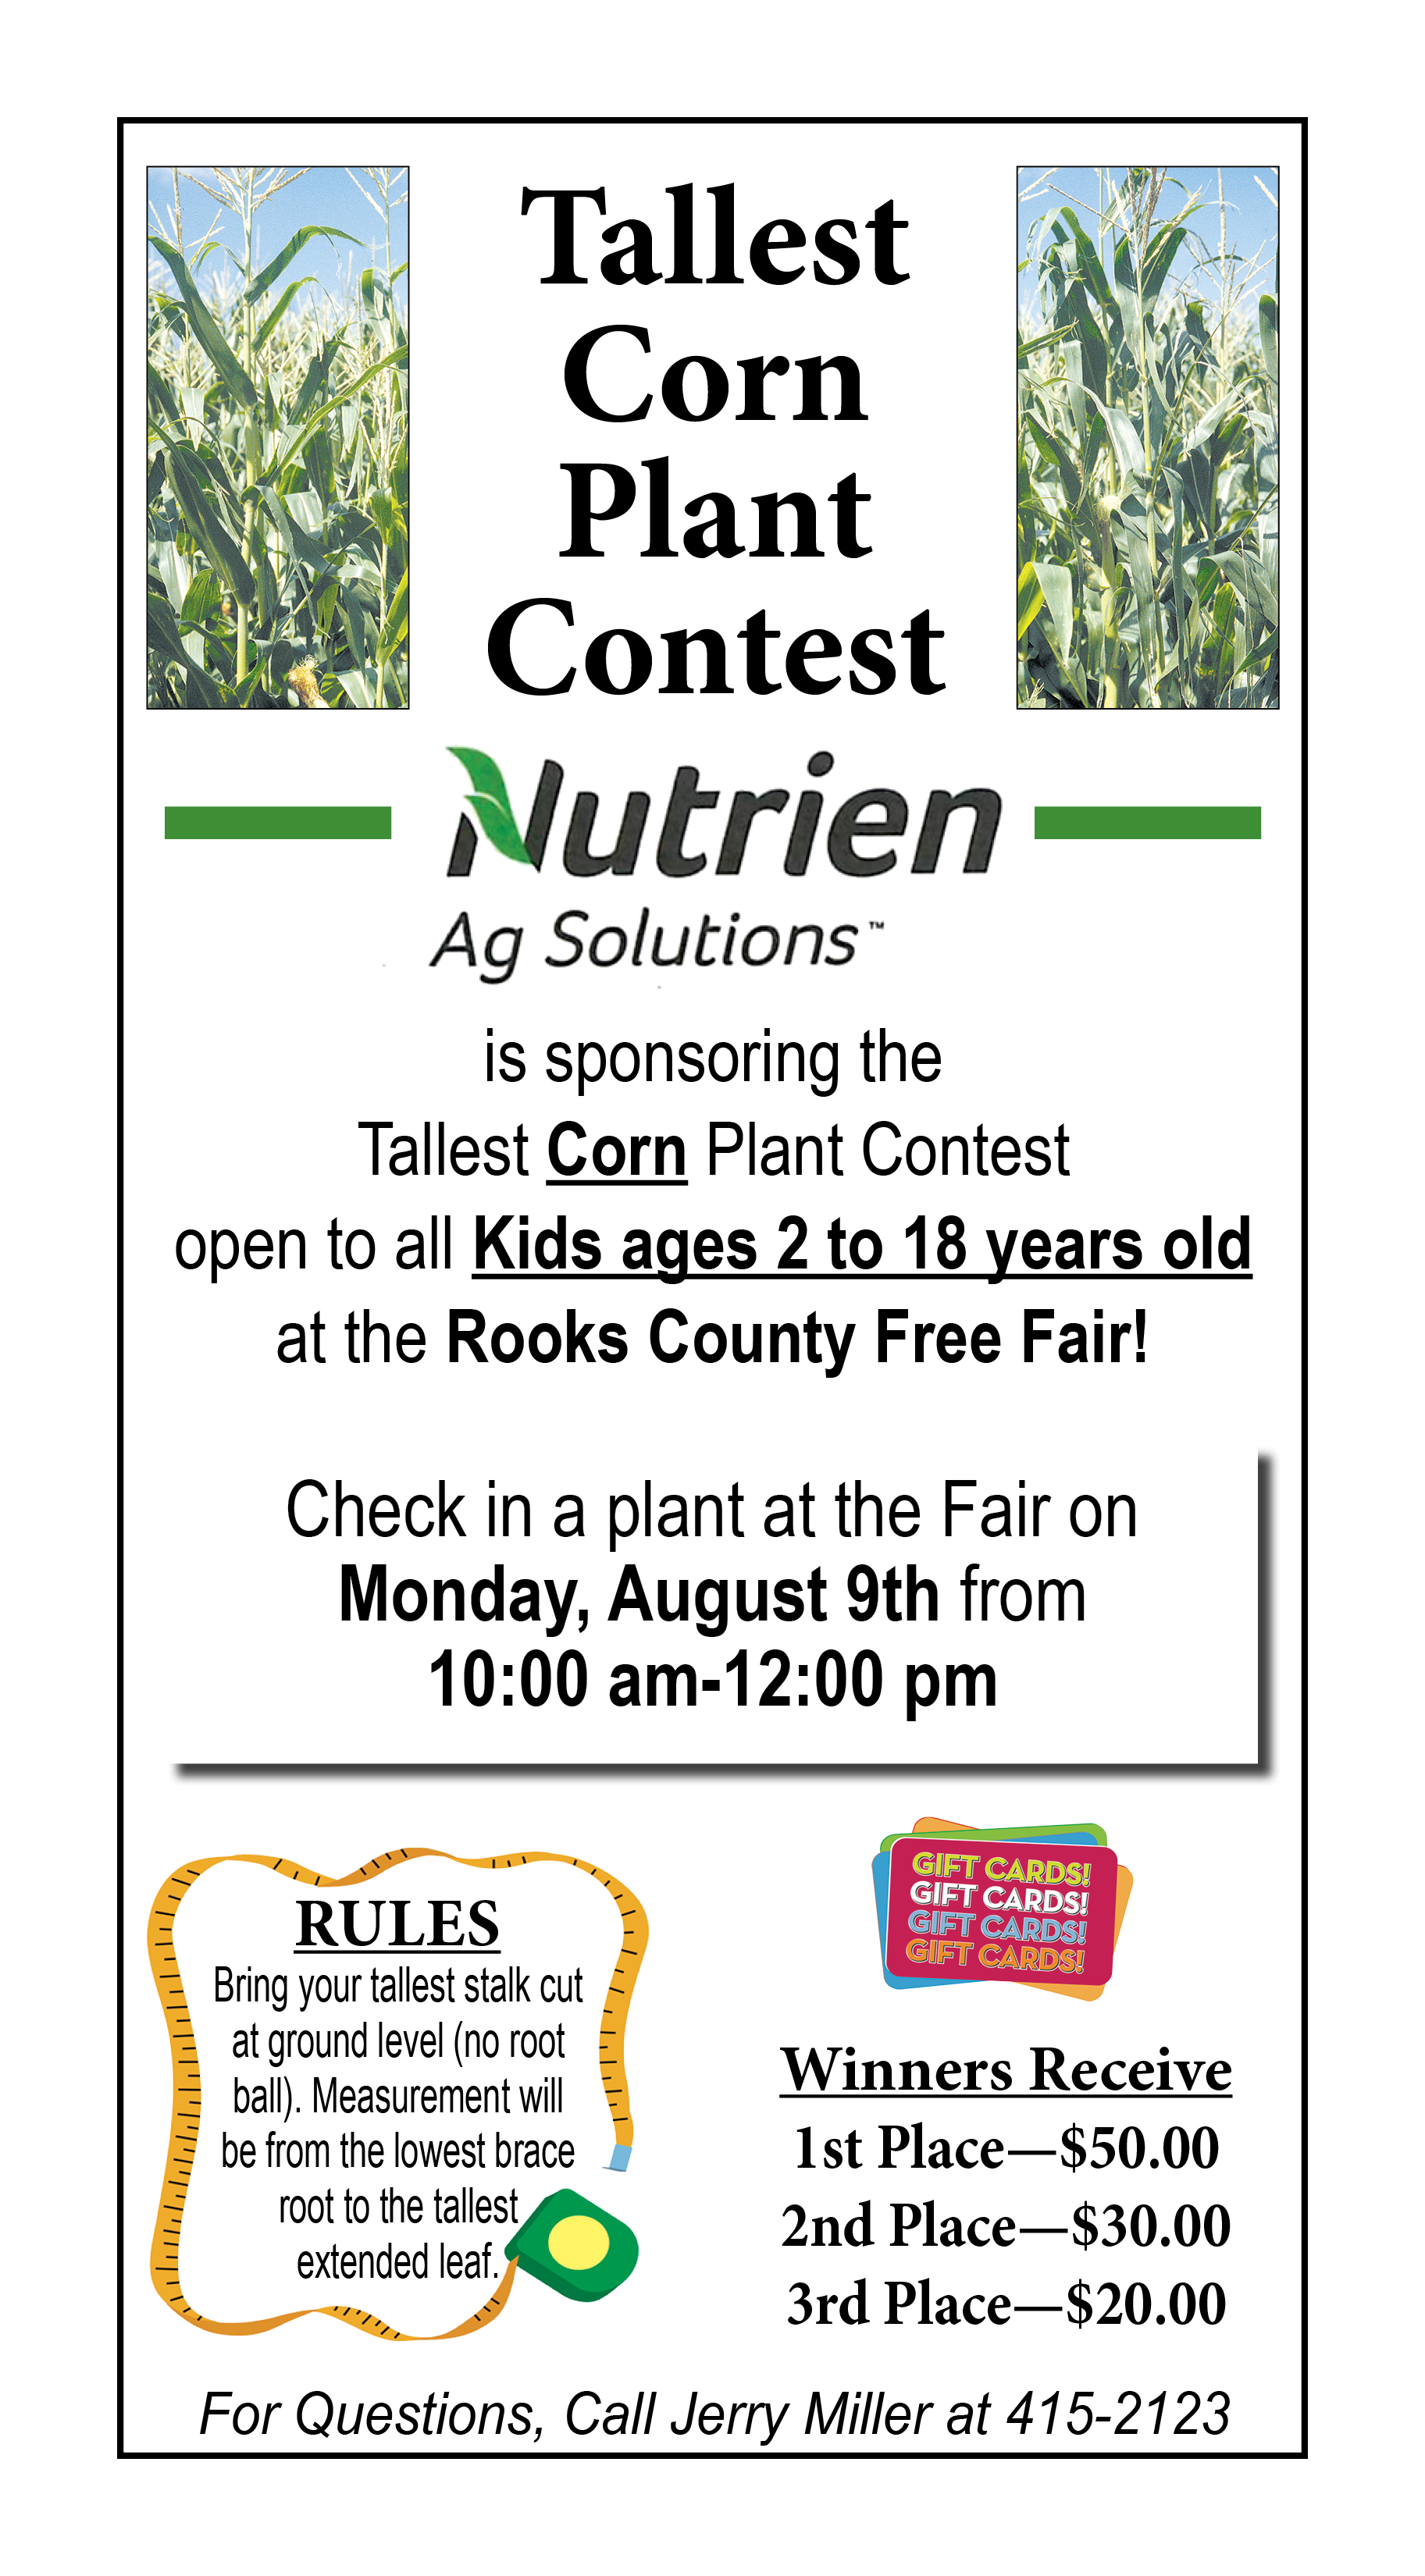 Tallest corn plant contest to be held at the Rooks County Free Fair